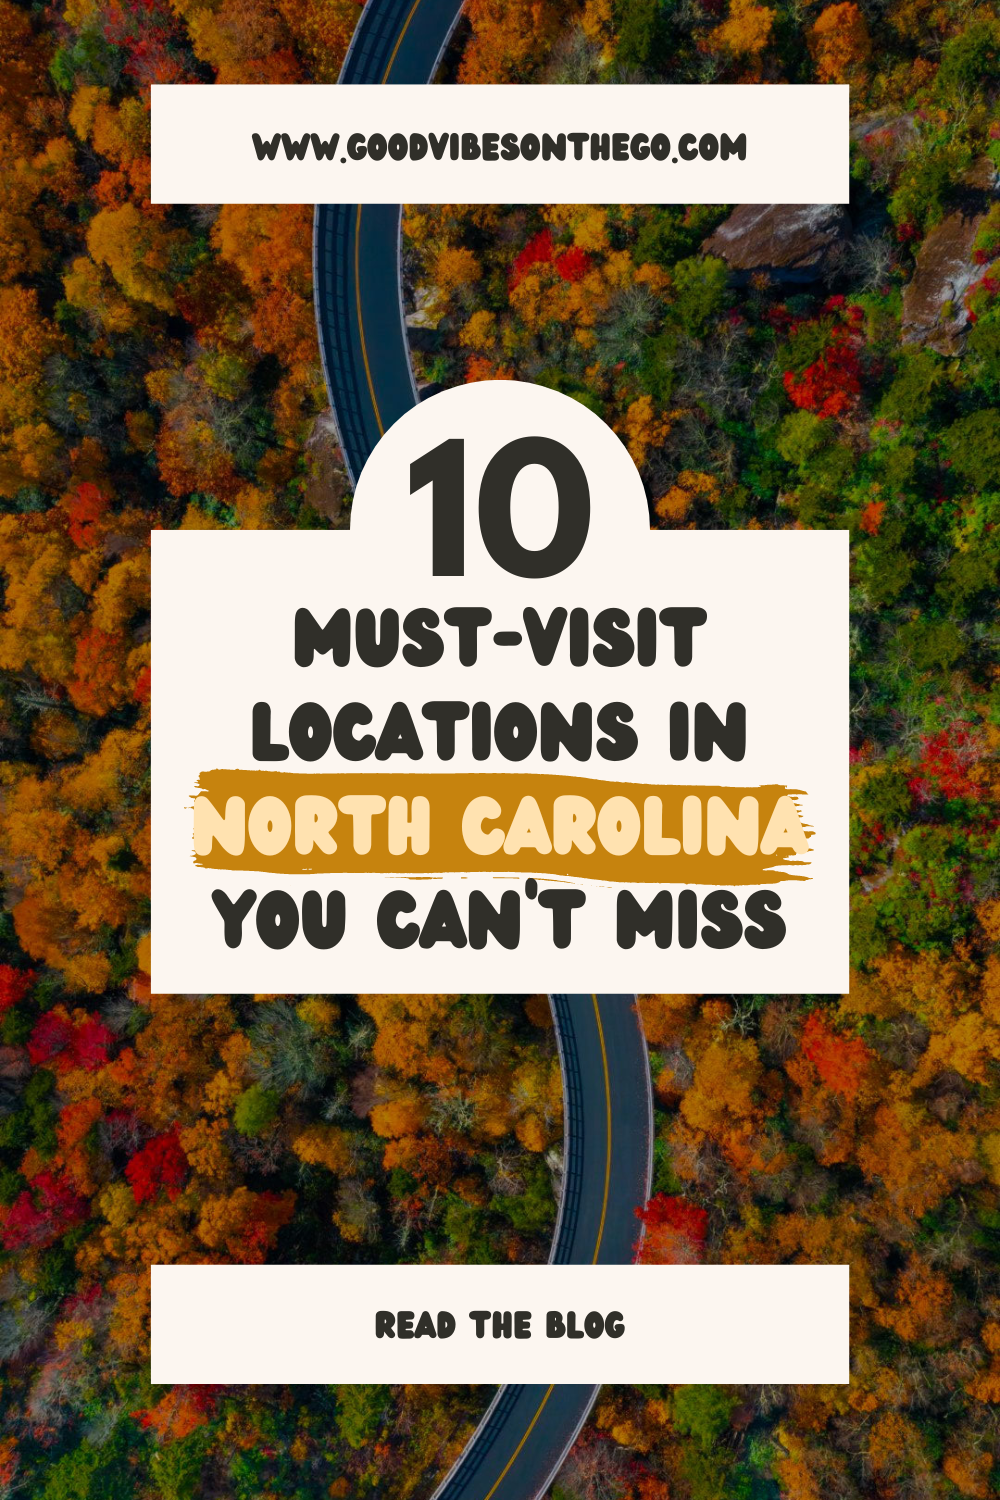 10 Must-Visit Locations in North Carolina You Can't Miss